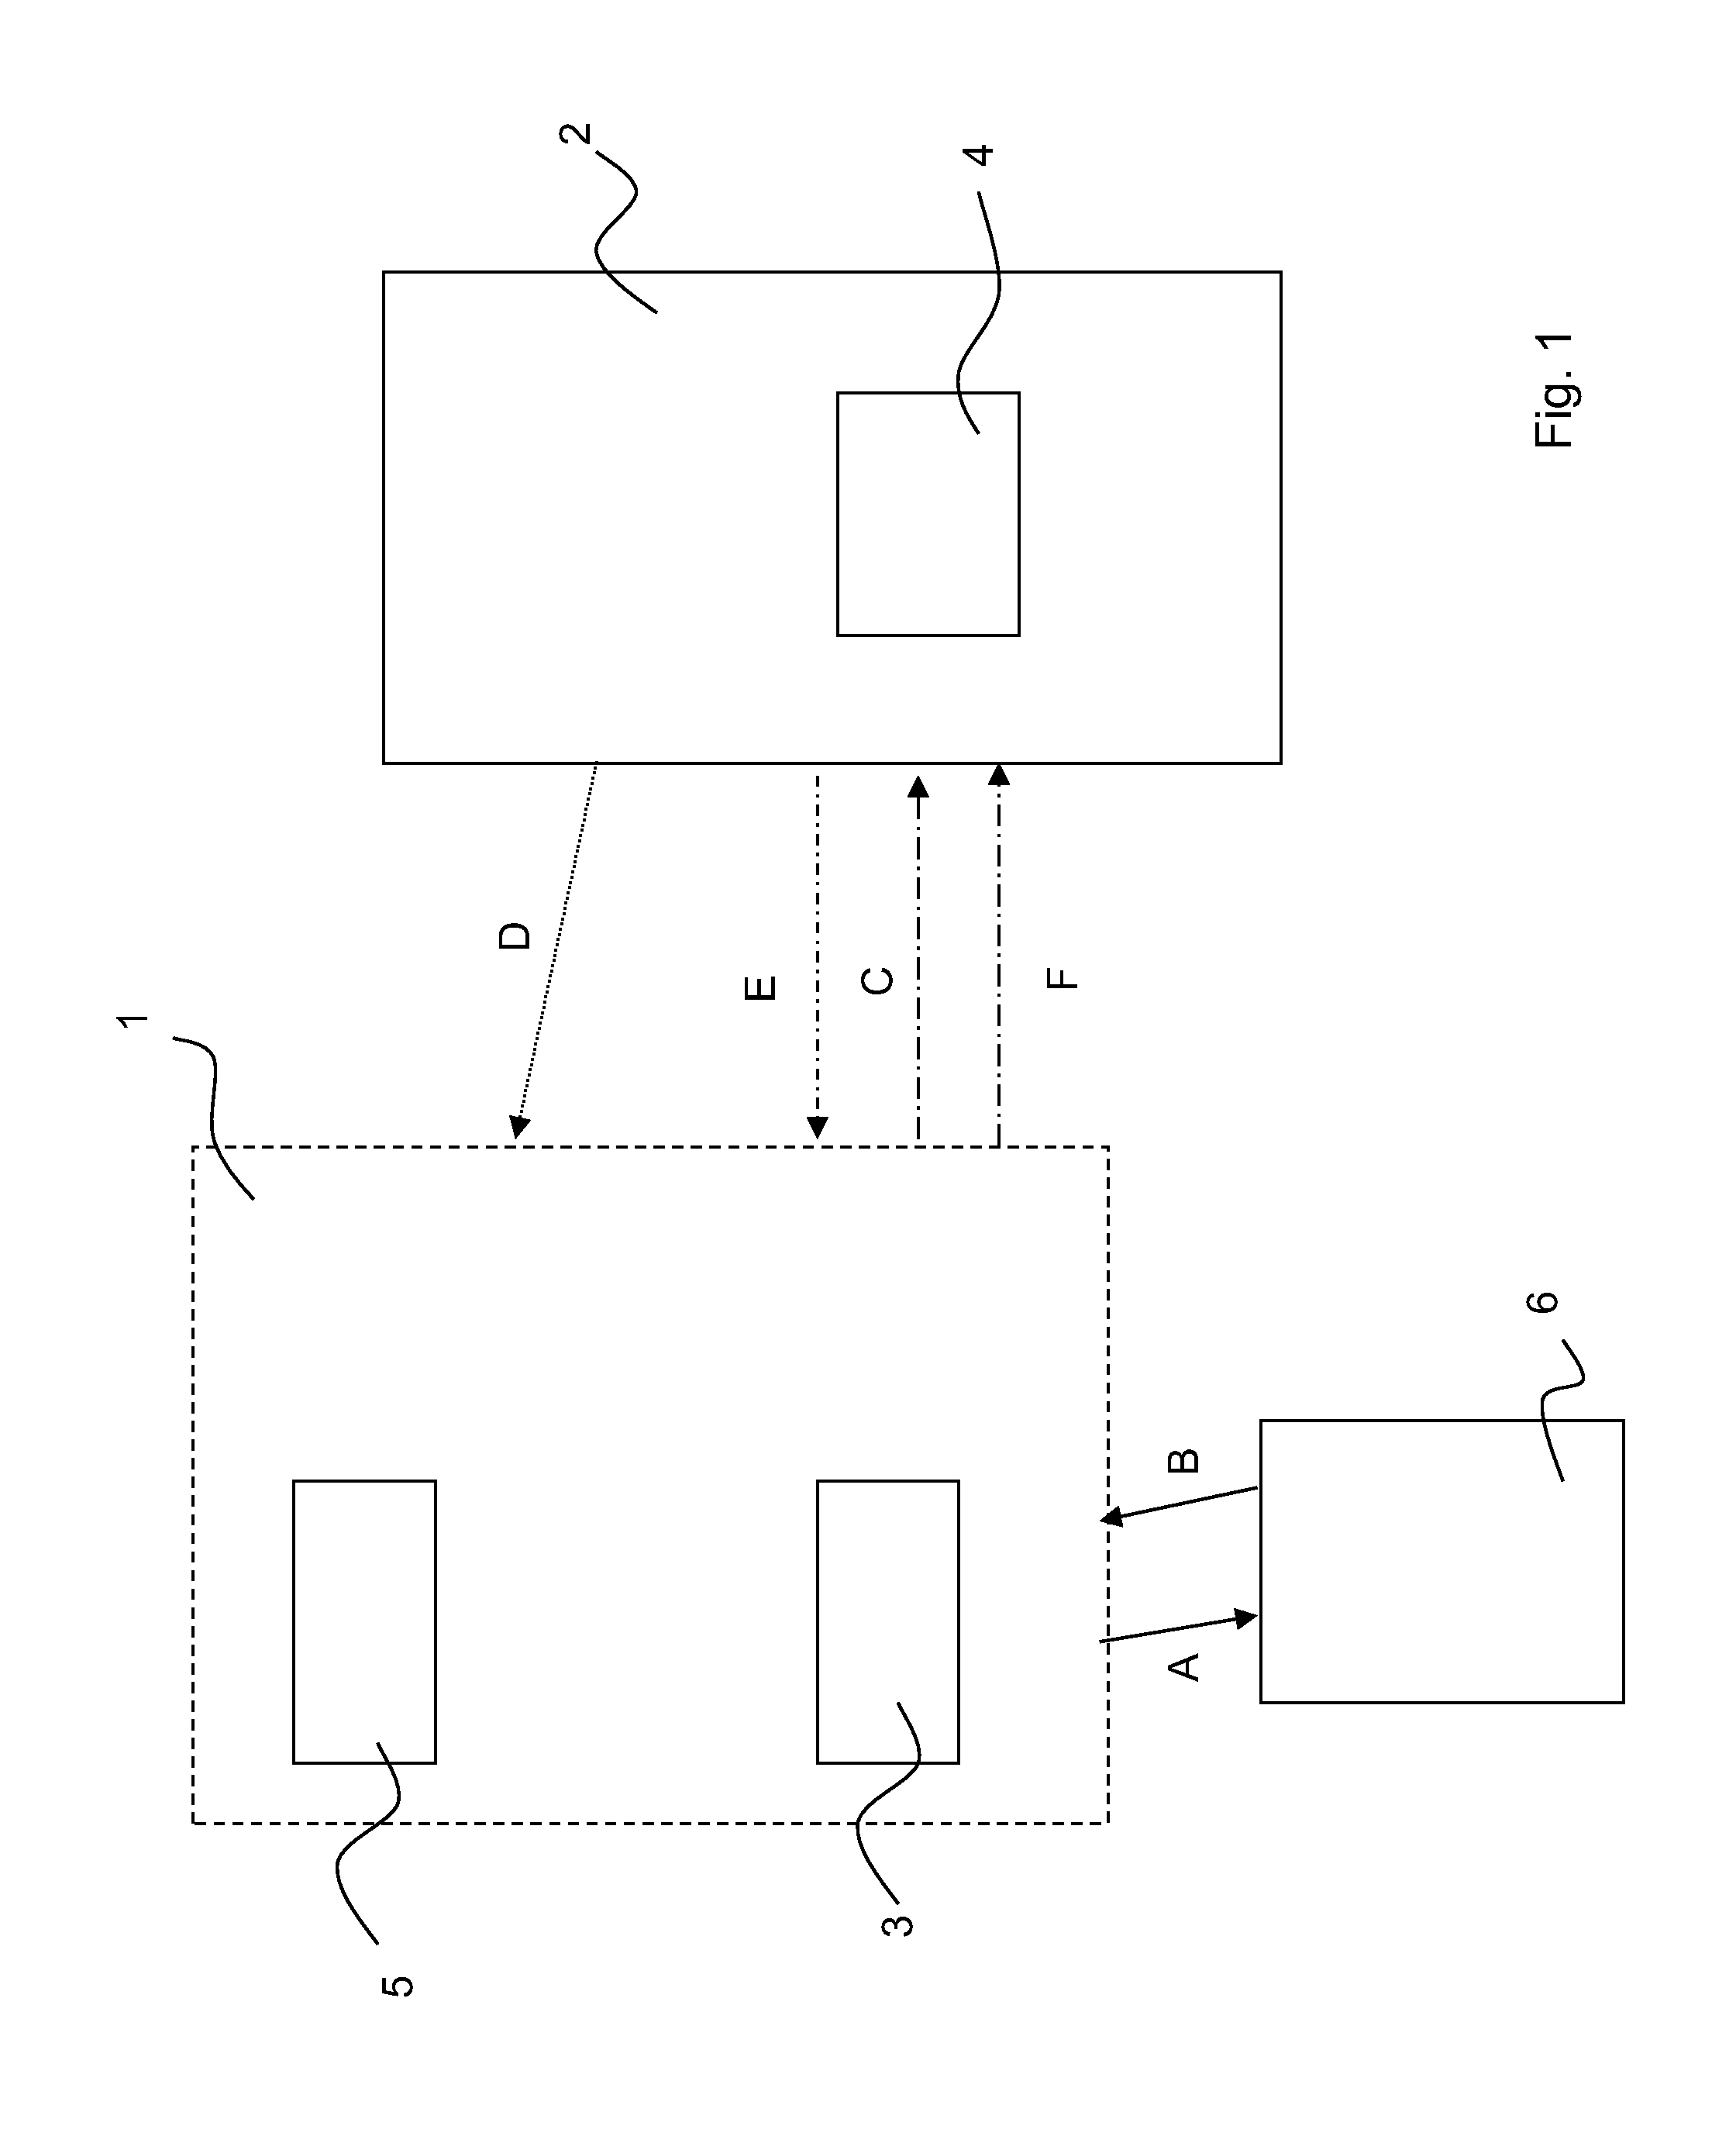 Method of authenticating a user at a service on a service server, application and system